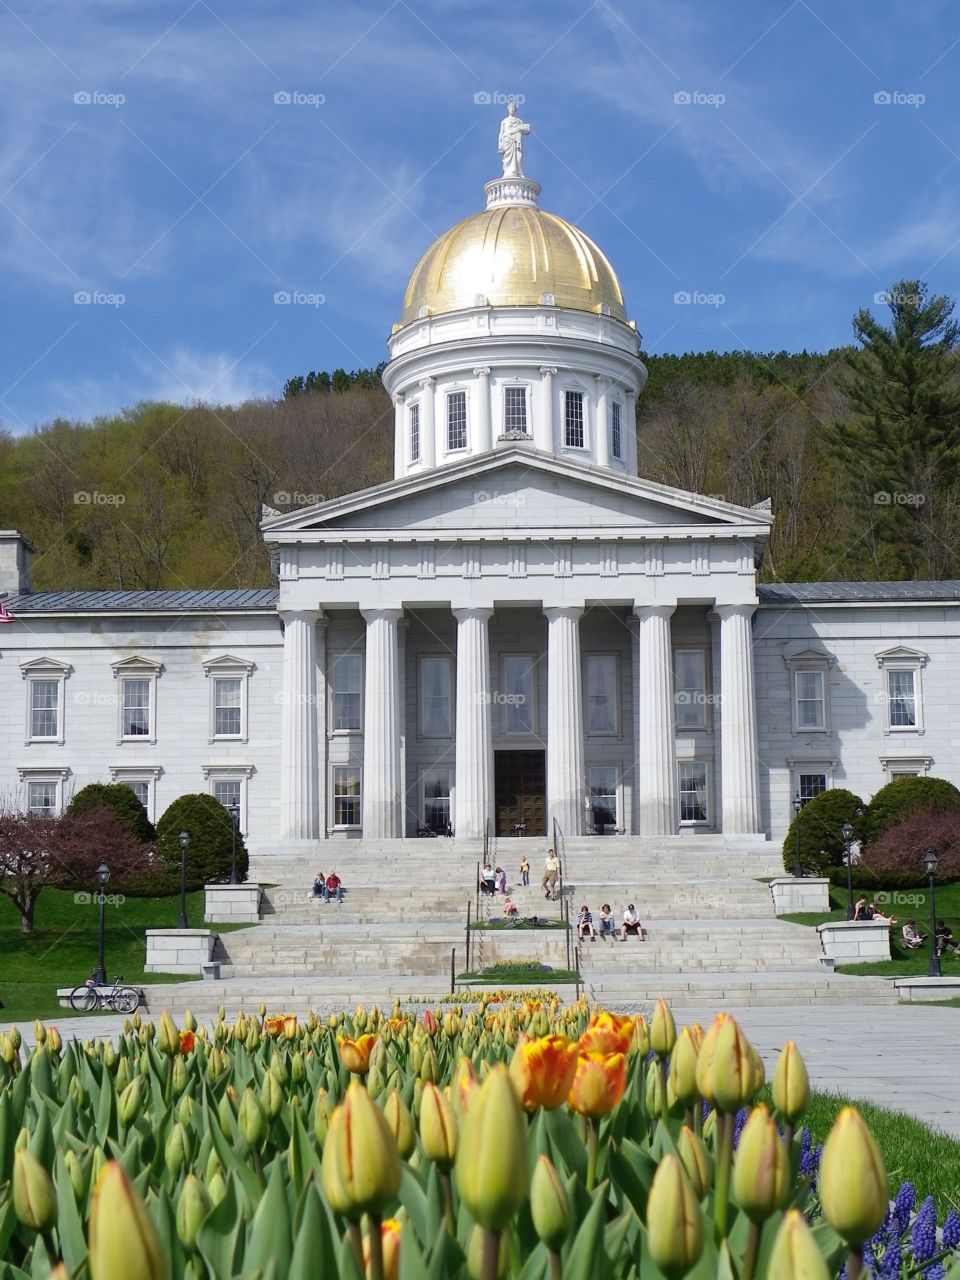 Montpelier Spring . Capitol building of Montpelier, Vermont in spring with tulips in the front yard